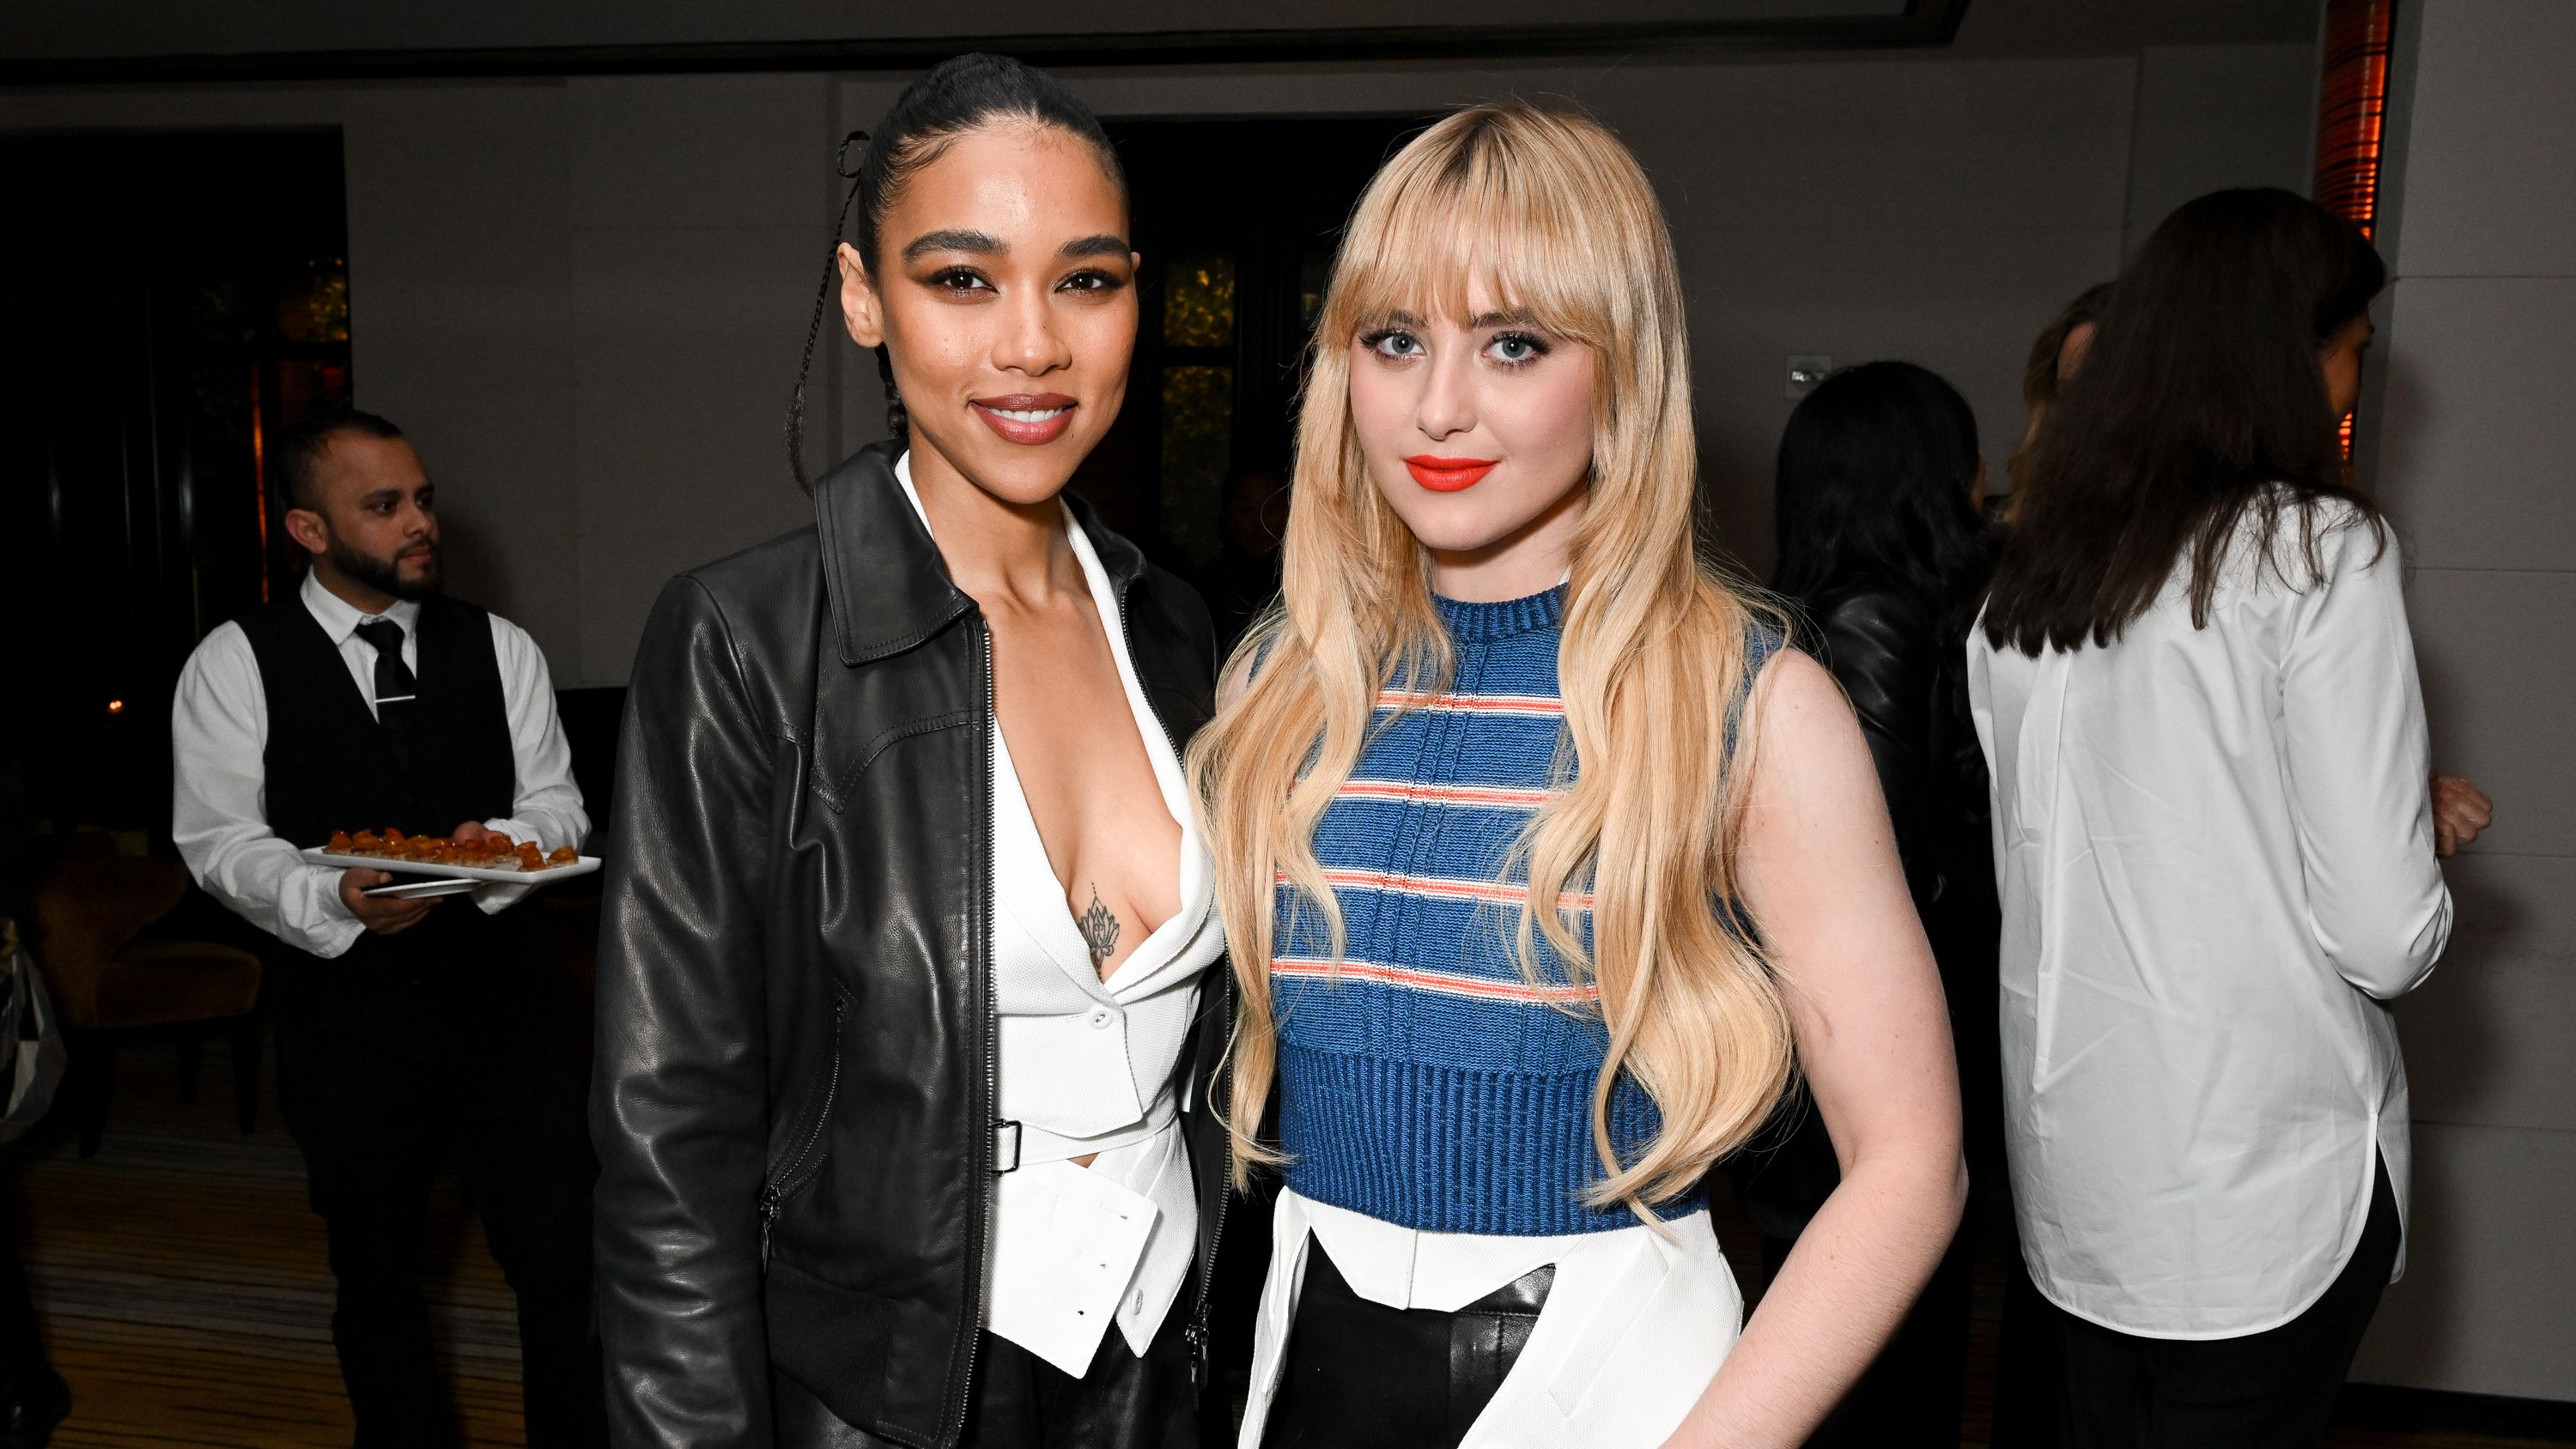 Alexandra Shipp and Kathryn Newton attend a cocktail party and dinner hosted by Tod's on February 13.